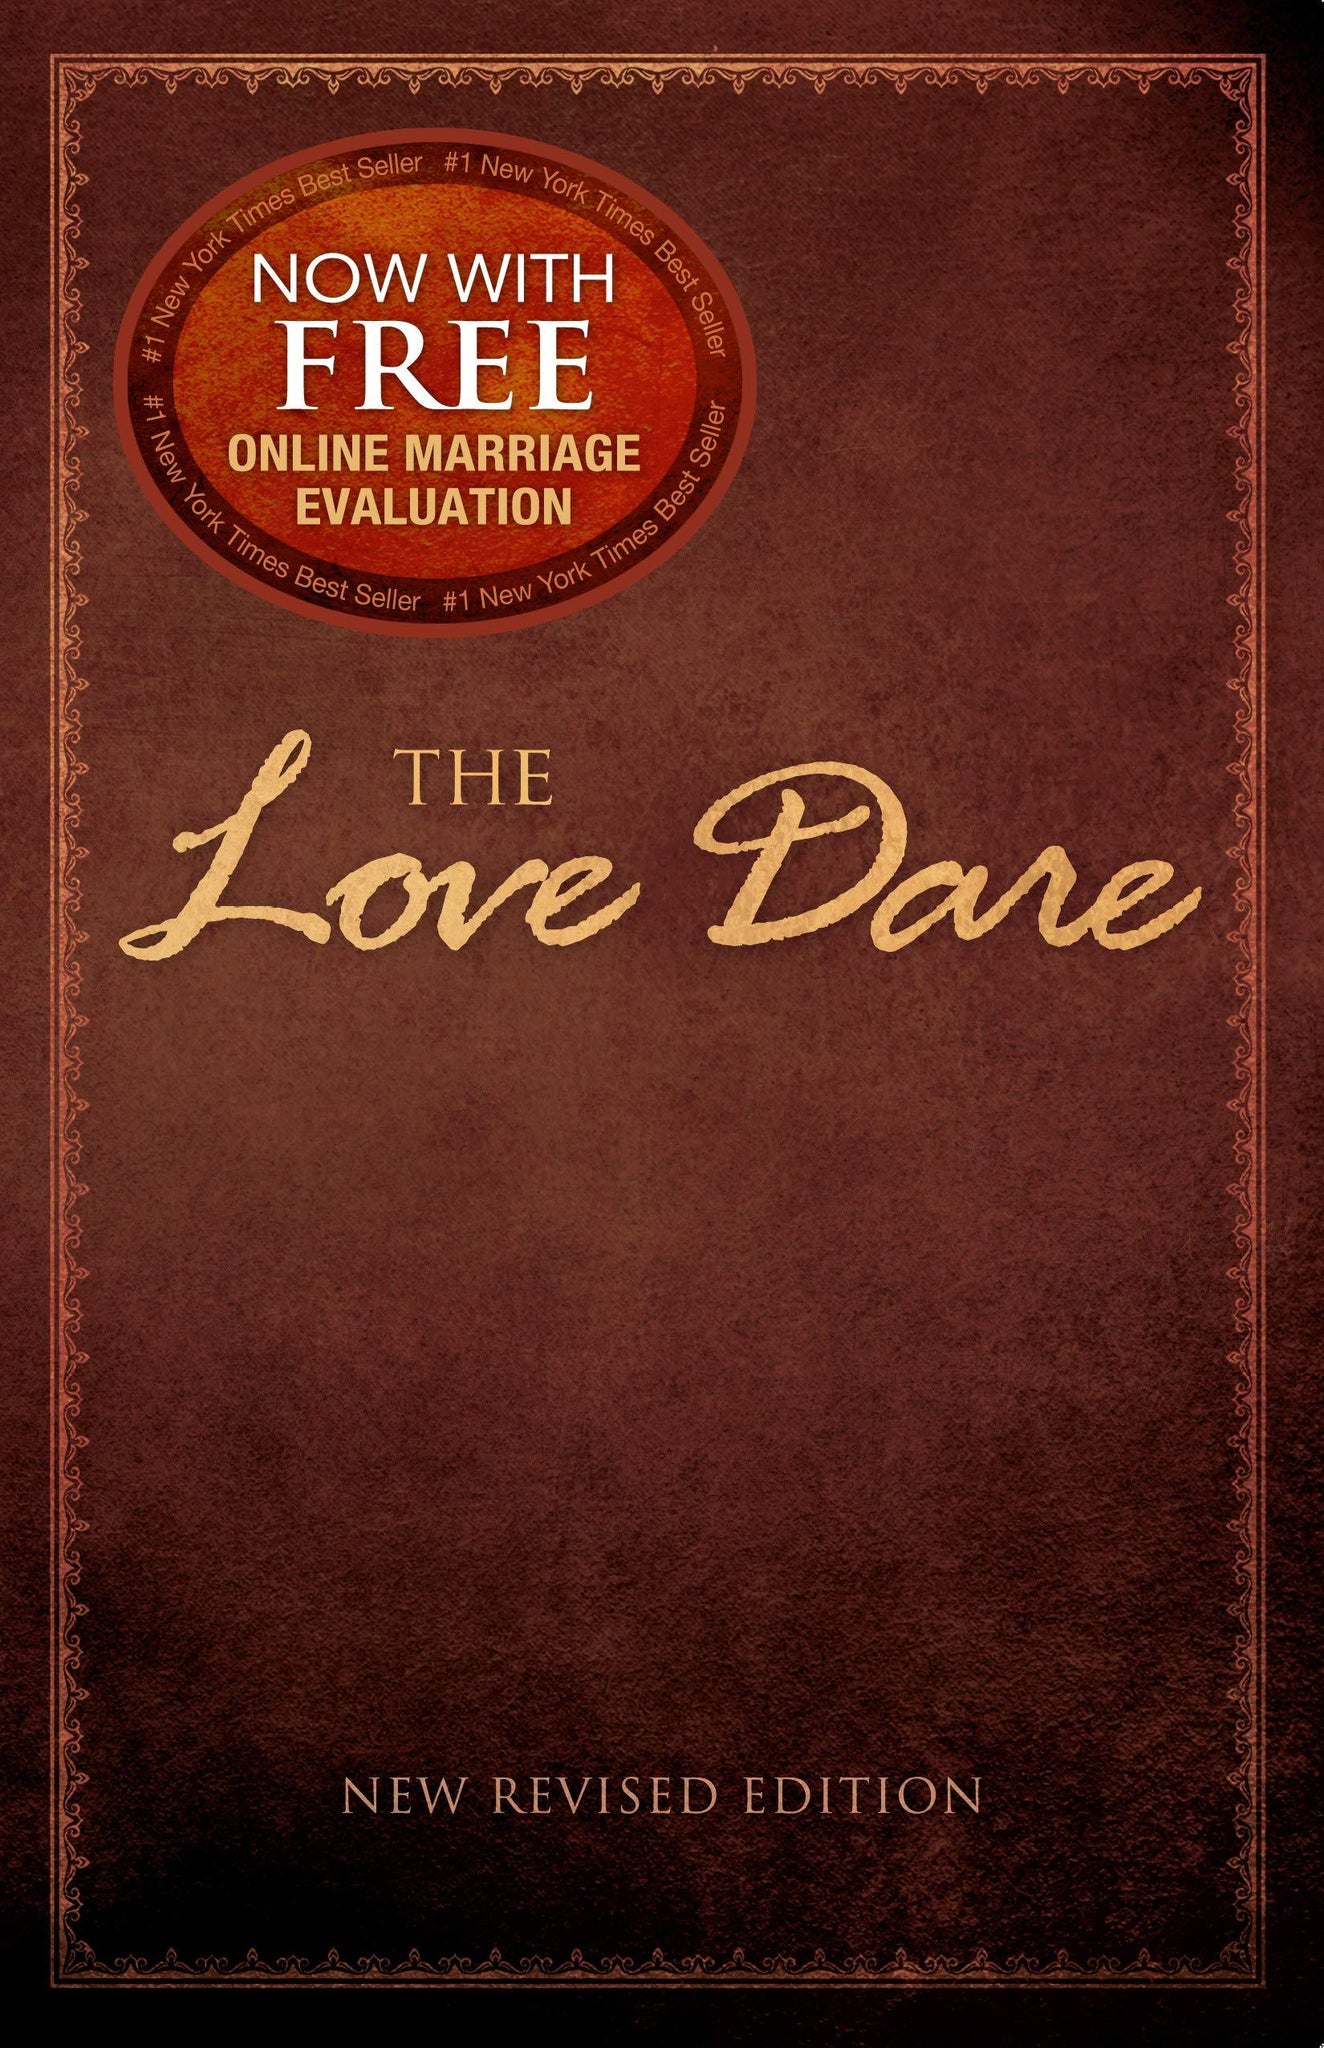 "The Love Dare" By Alex and Stephen Kendrick